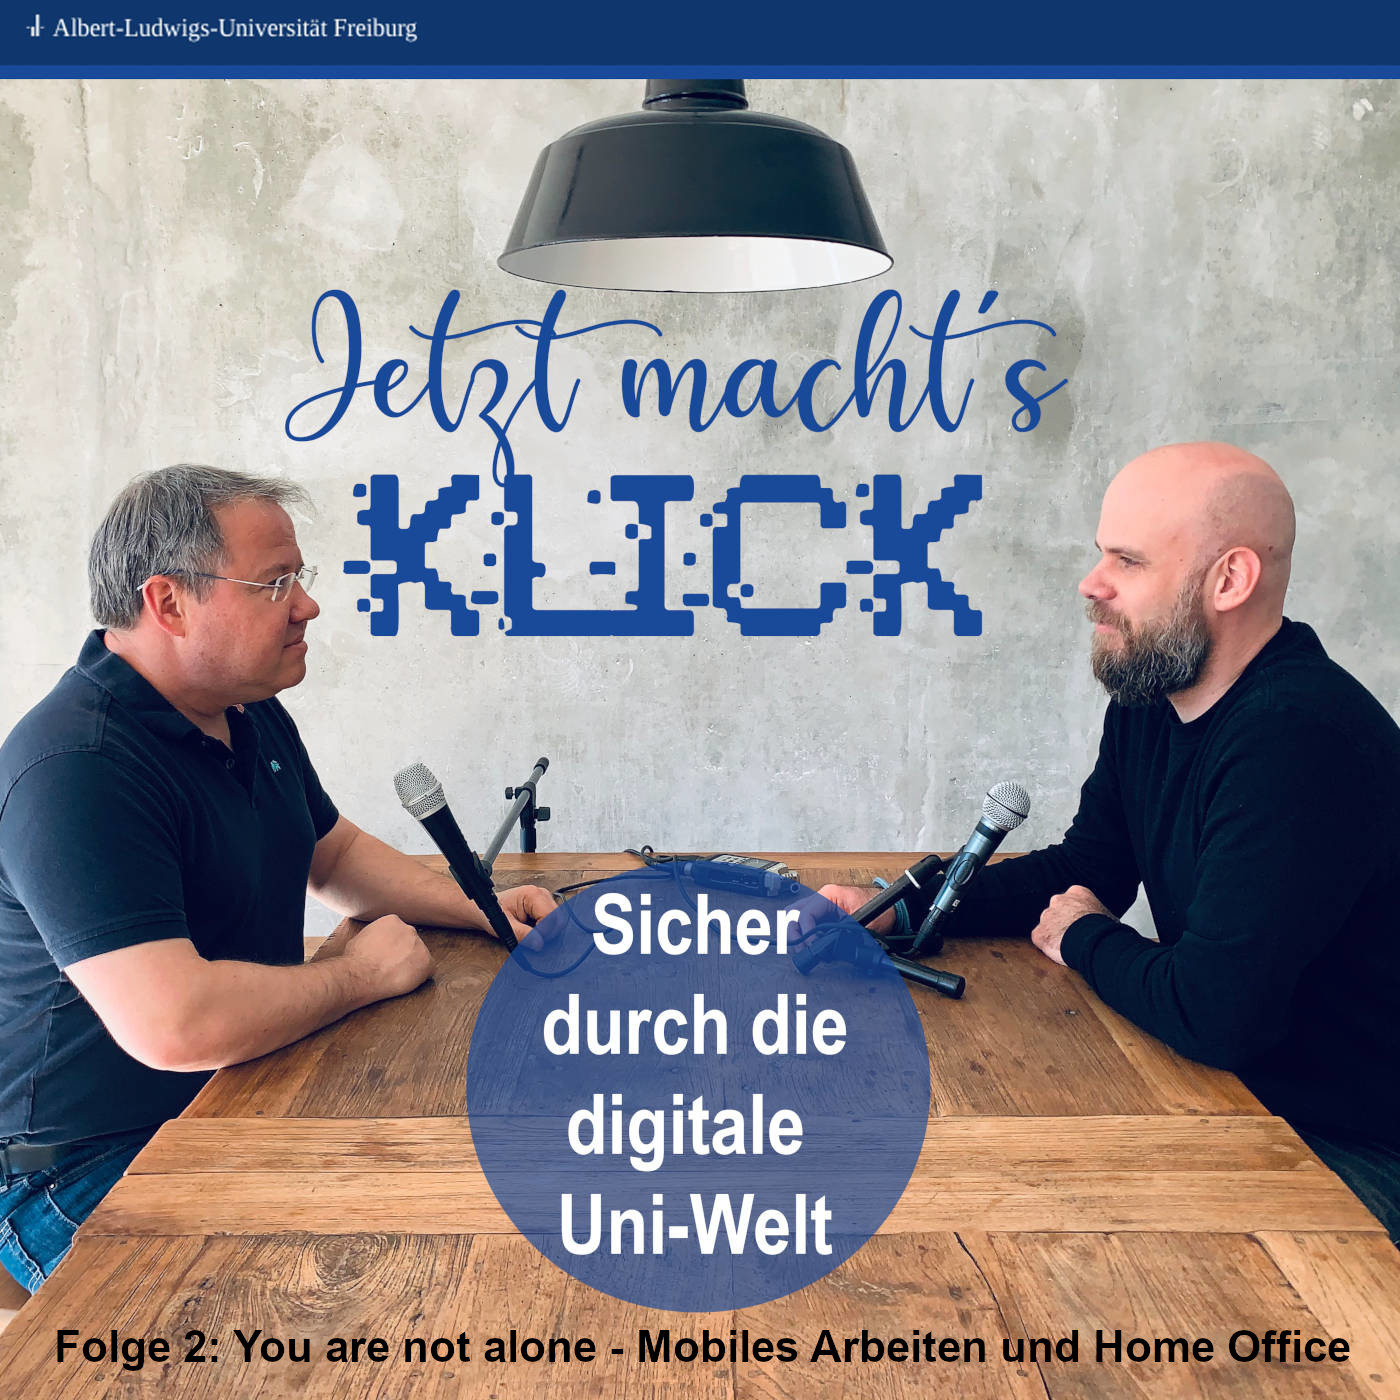 Podcast "You are not alone - Mobiles Arbeiten und Home Office" (Folge 2)